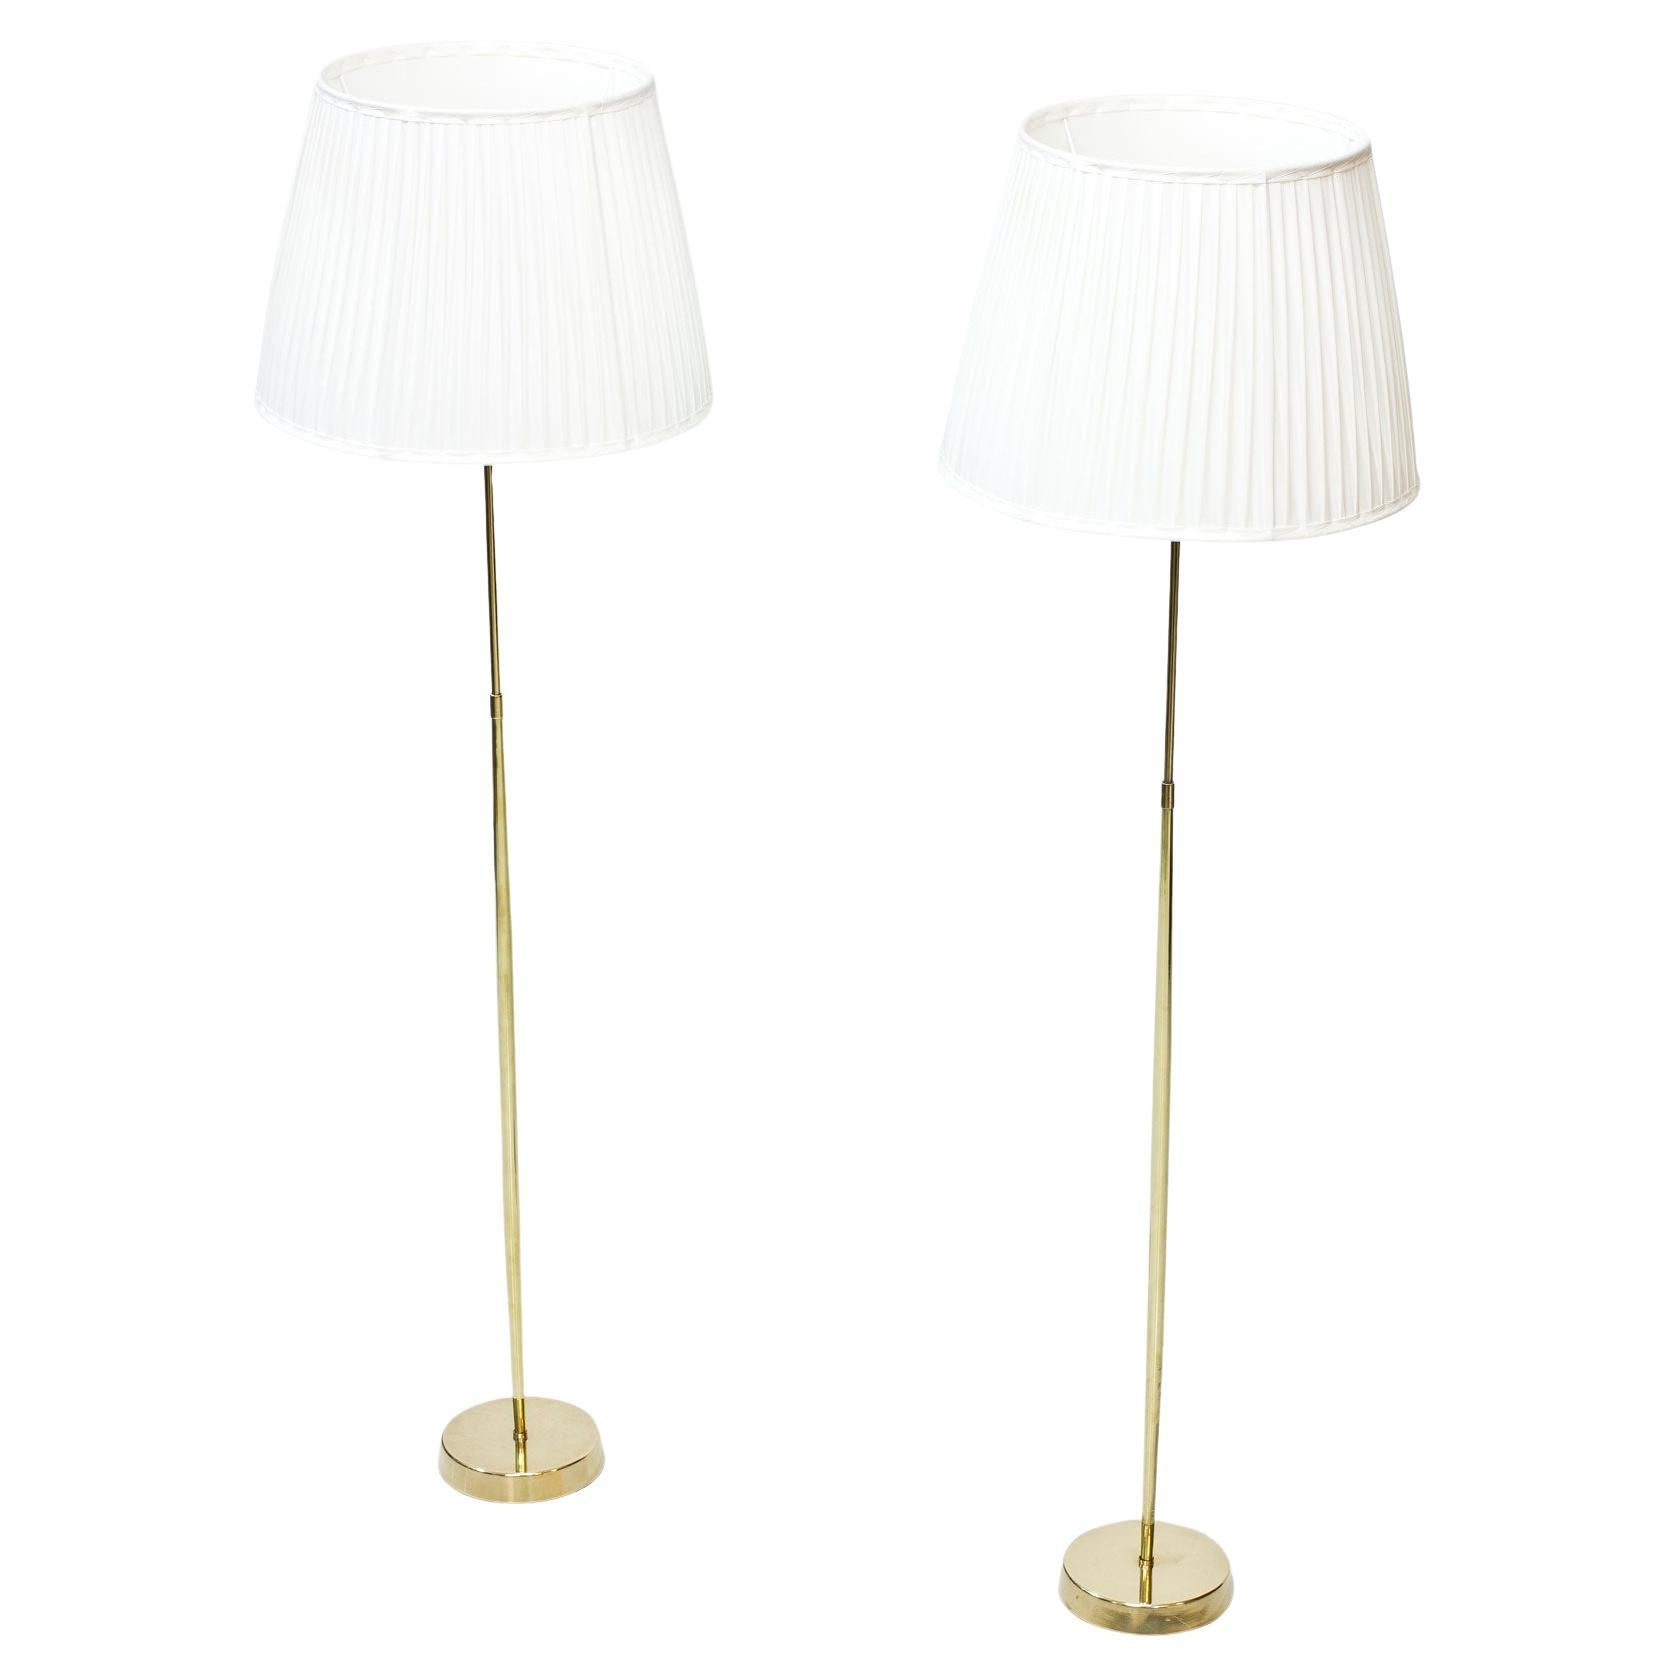 Pair of ASEA Belysning Brass Floor Lamps, 1950s, Hand-Pleated Chintz Shades For Sale